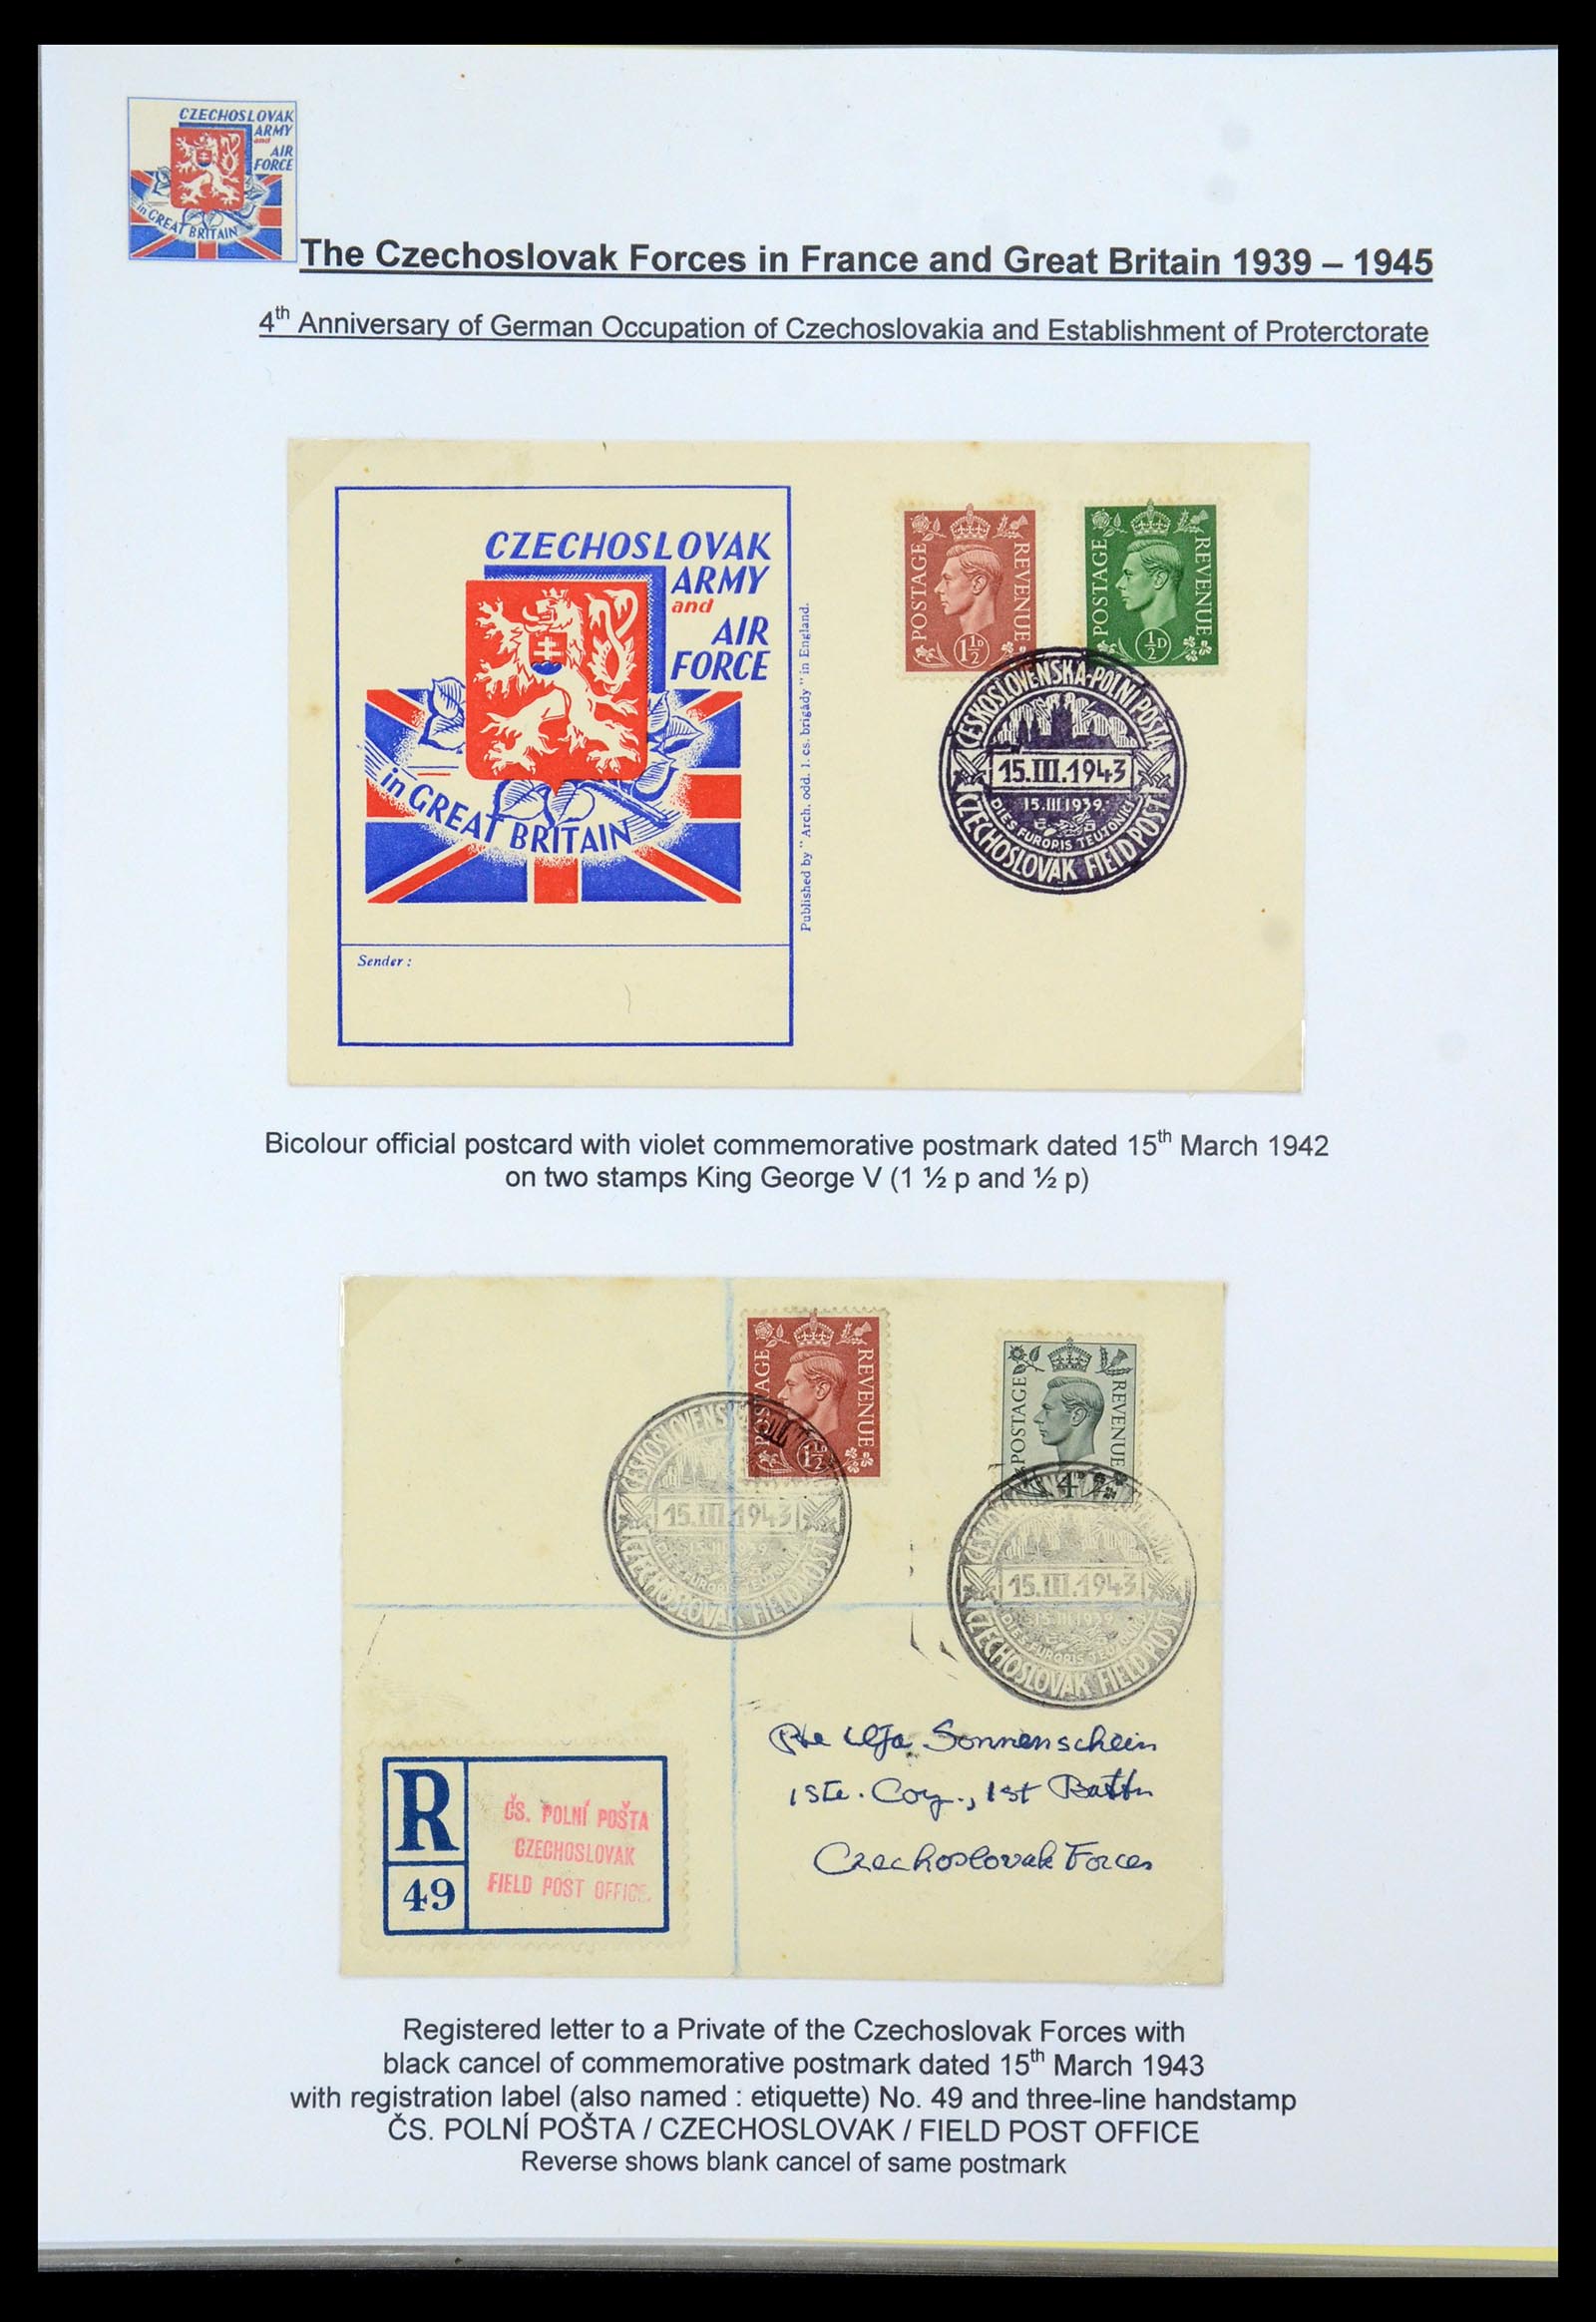 35574 076 - Stamp Collection 35574 Czechoslovak forces in France and Great Britain 1